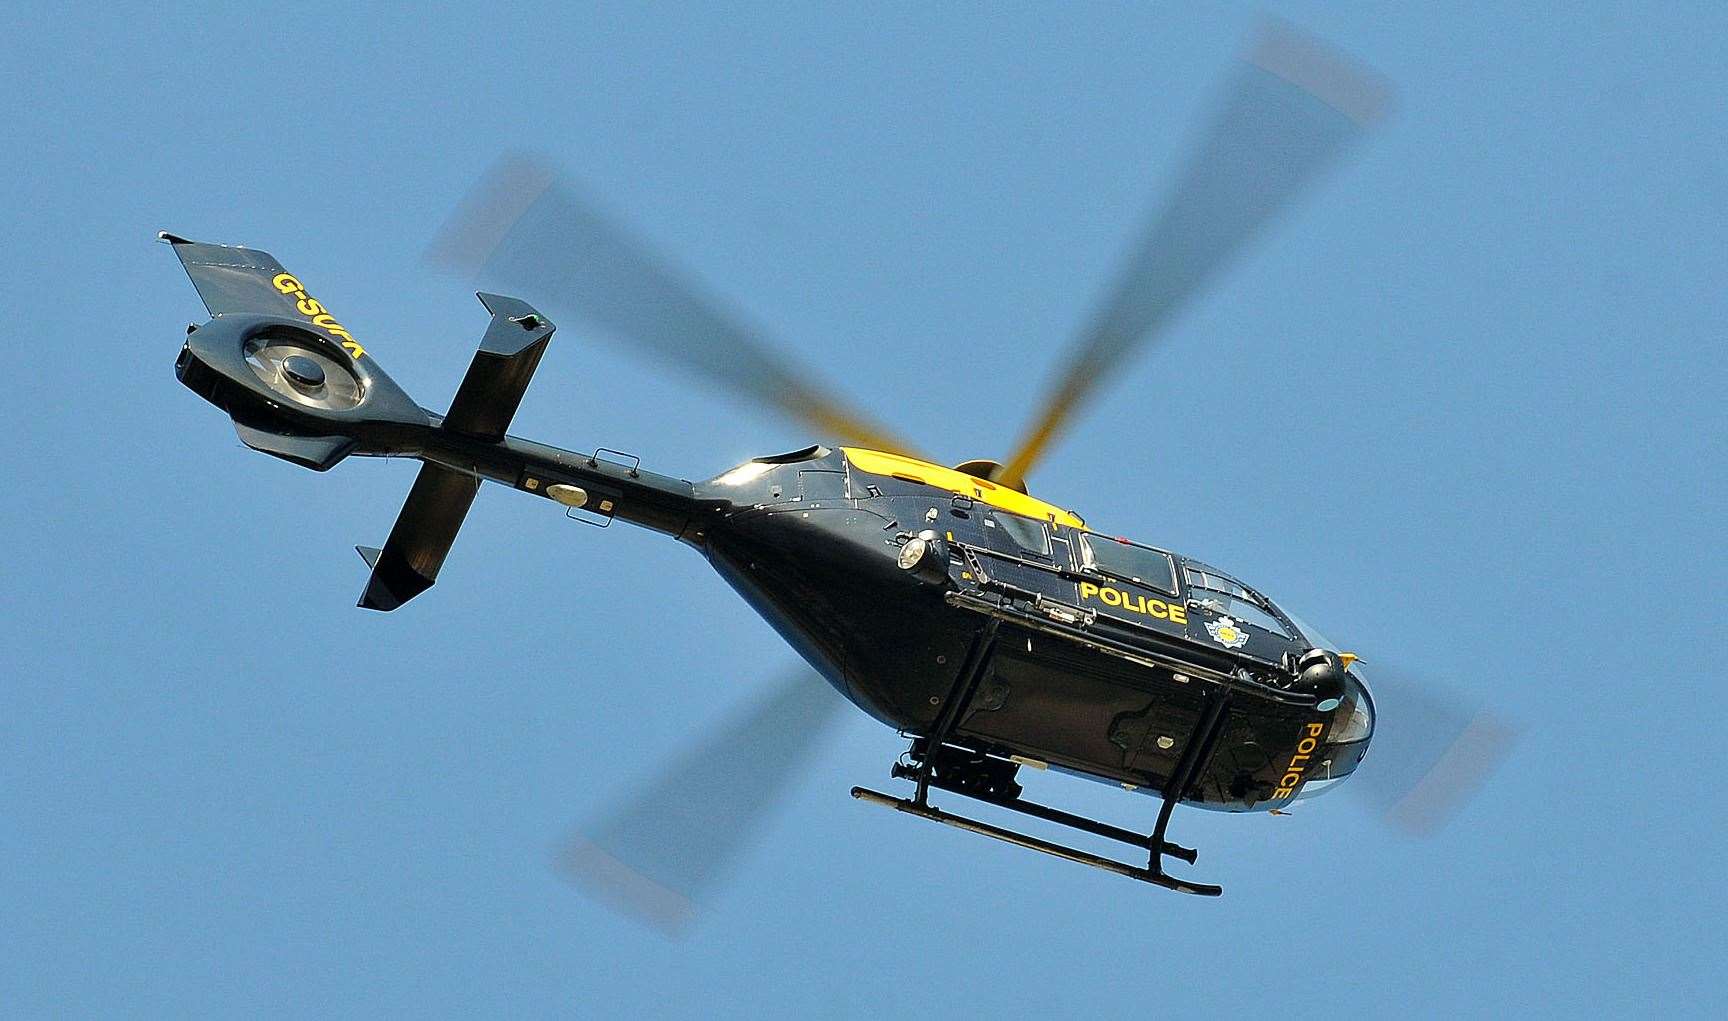 A police helicopter was used in the pursuit